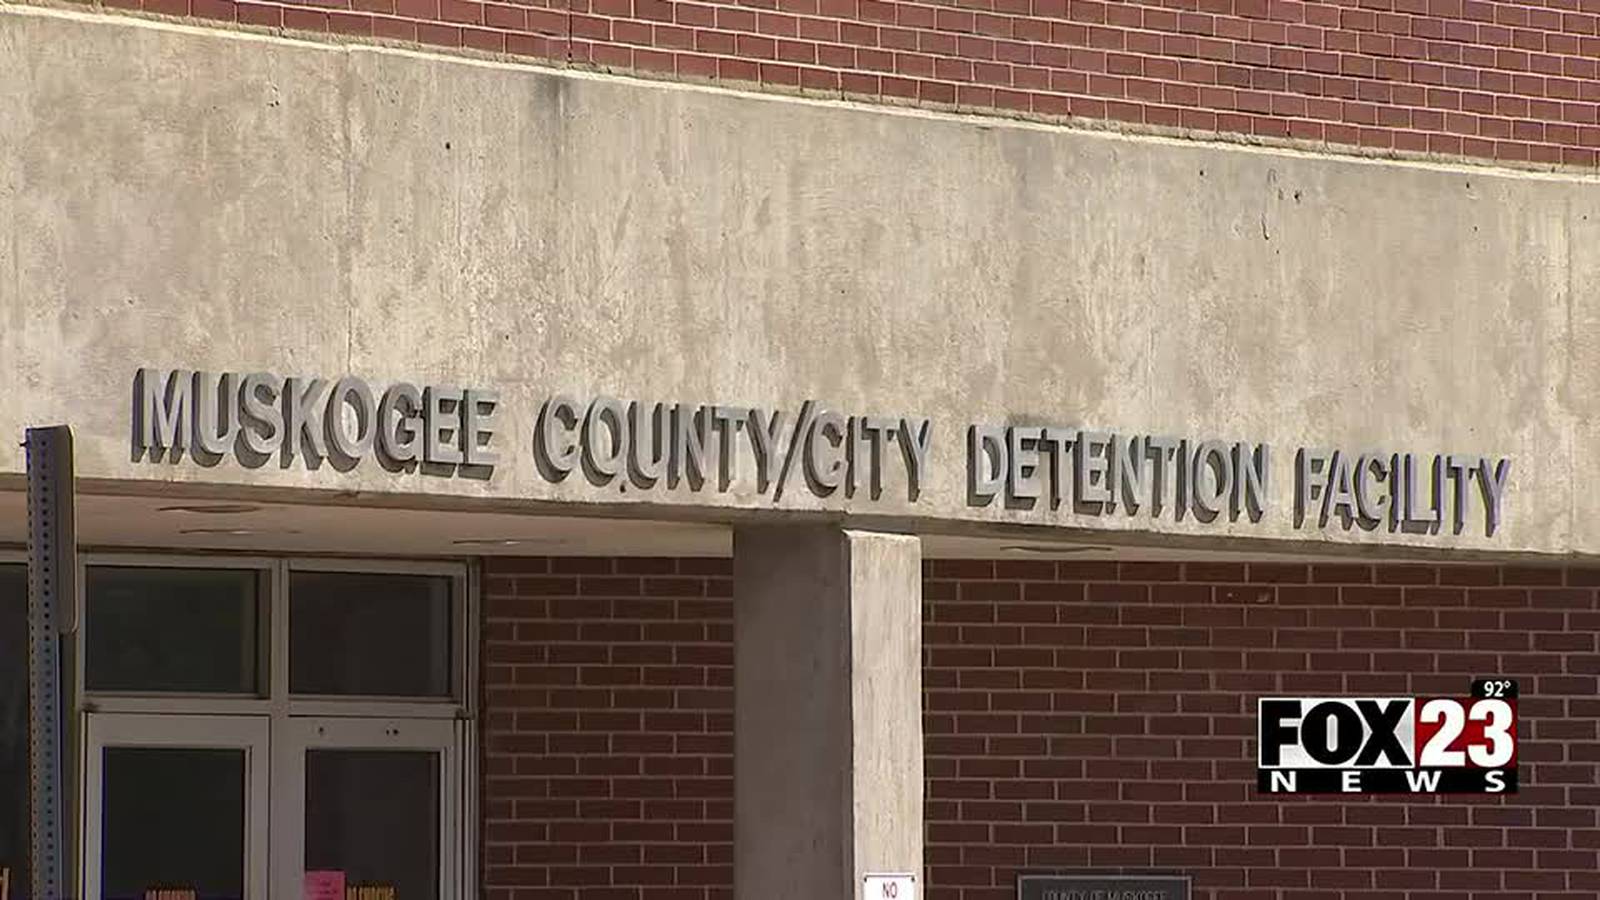 Muskogee County Jail recovers after high COVID 19 cases last week